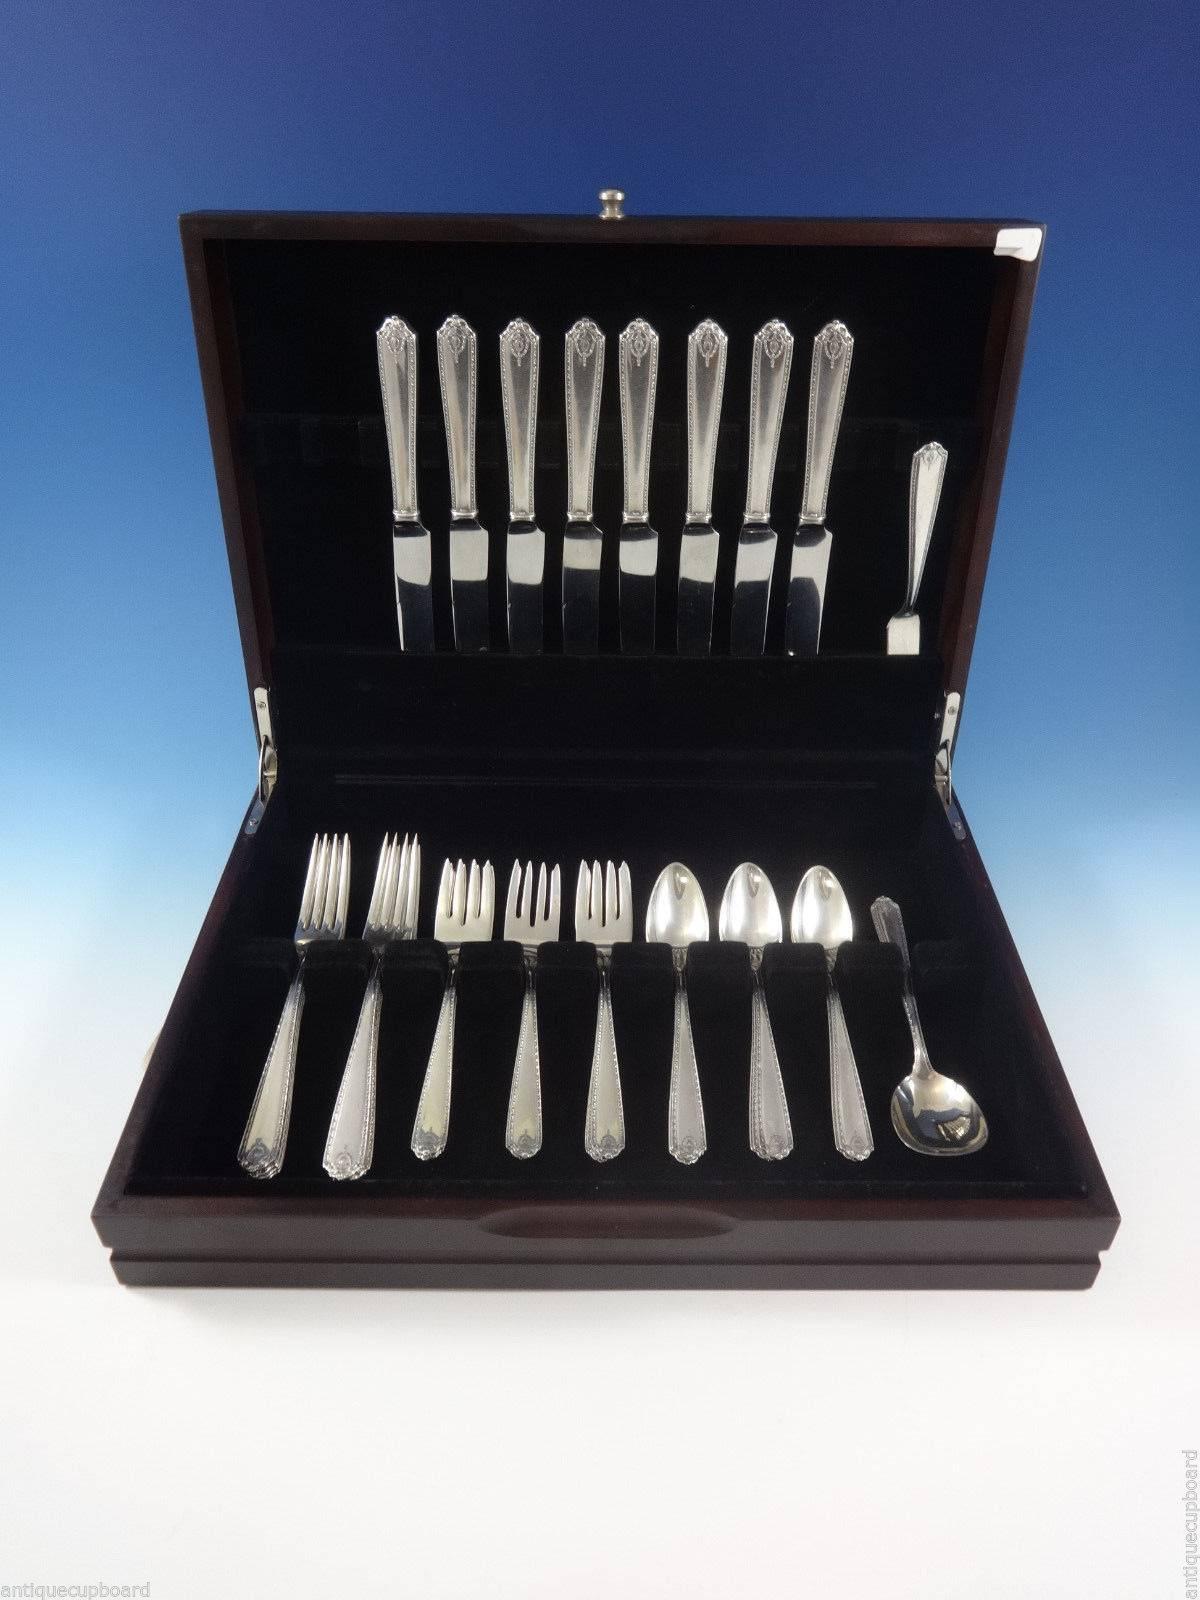 Lady Hilton by Westmorland sterling silver flatware set - 34 pieces. This set includes:

Eight knives, 8 3/4